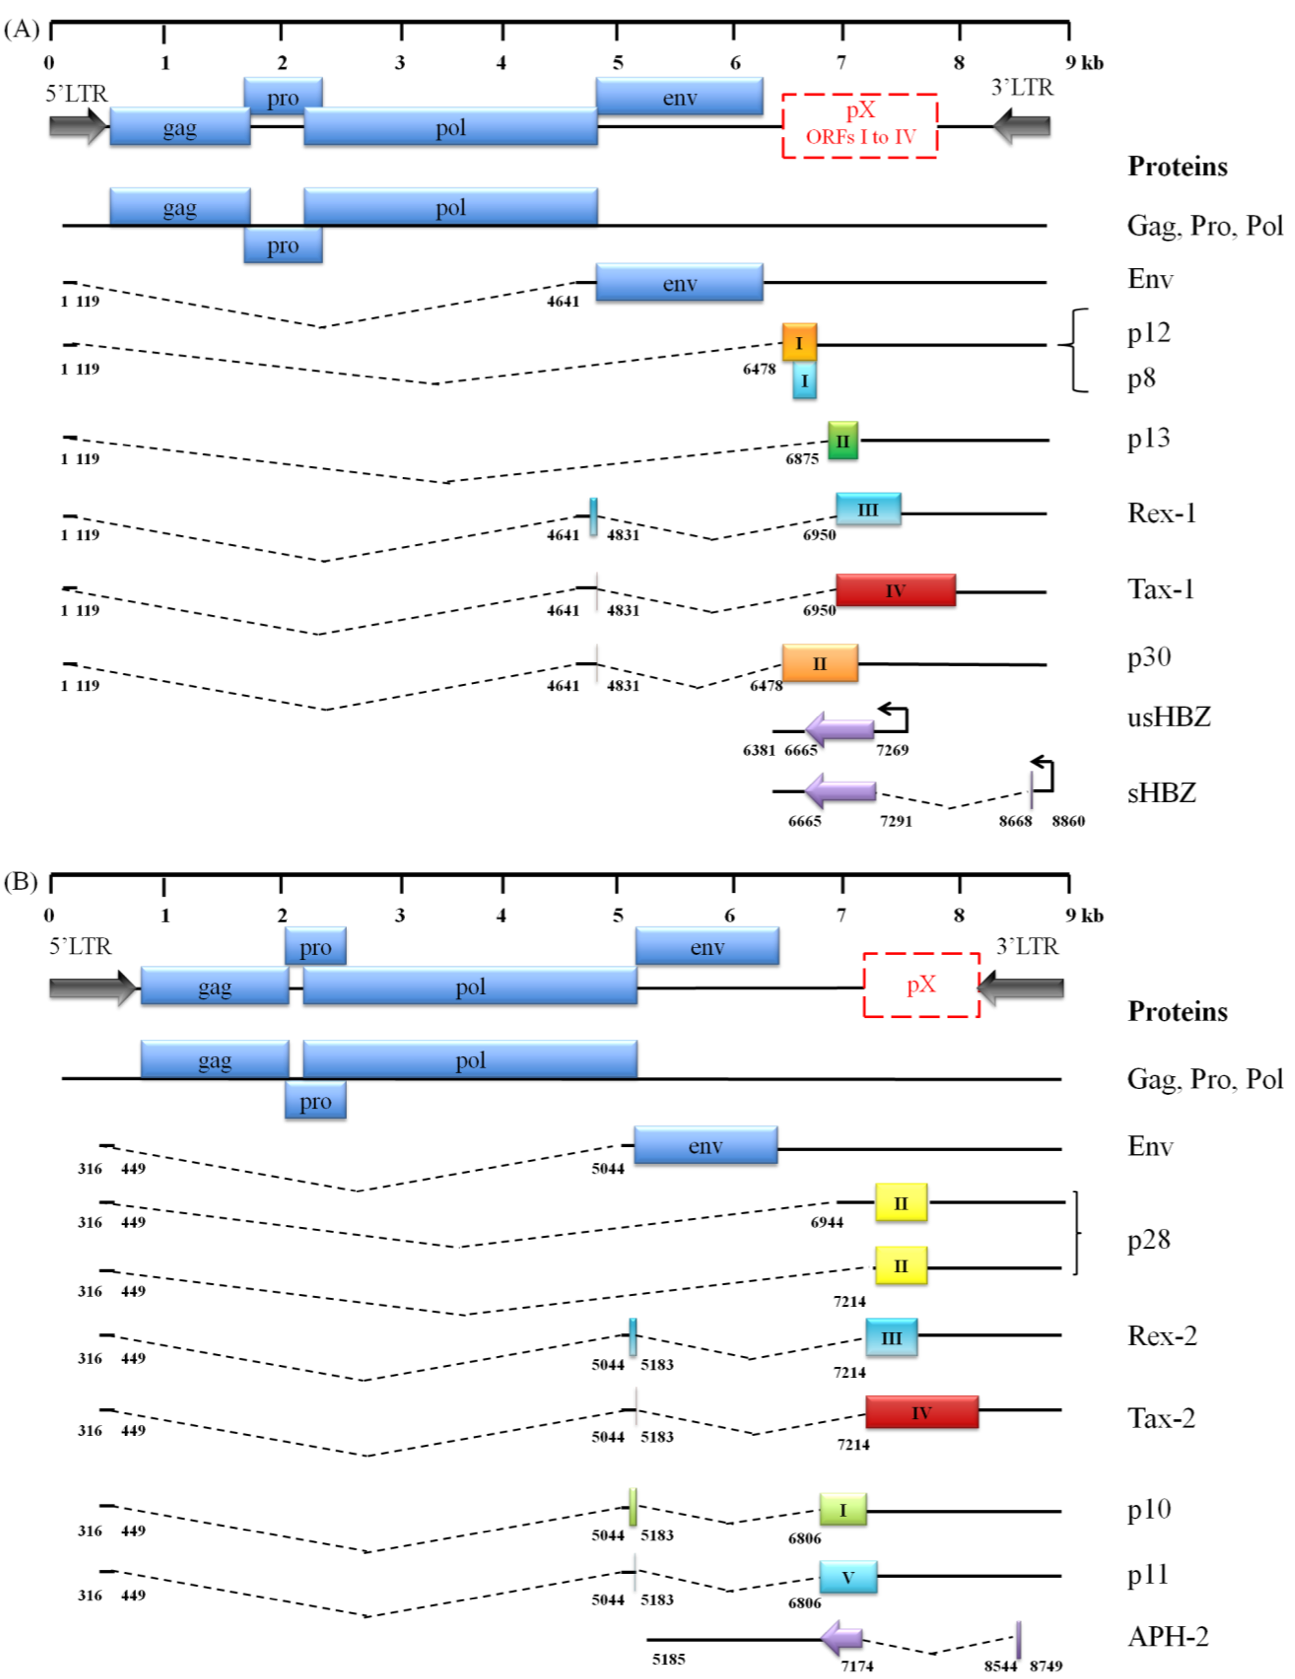 Comparison of the genomic organization, alternative splicing, and coding potential of HTLV-1 (A) and HTLV-2 (B) mRNAs.